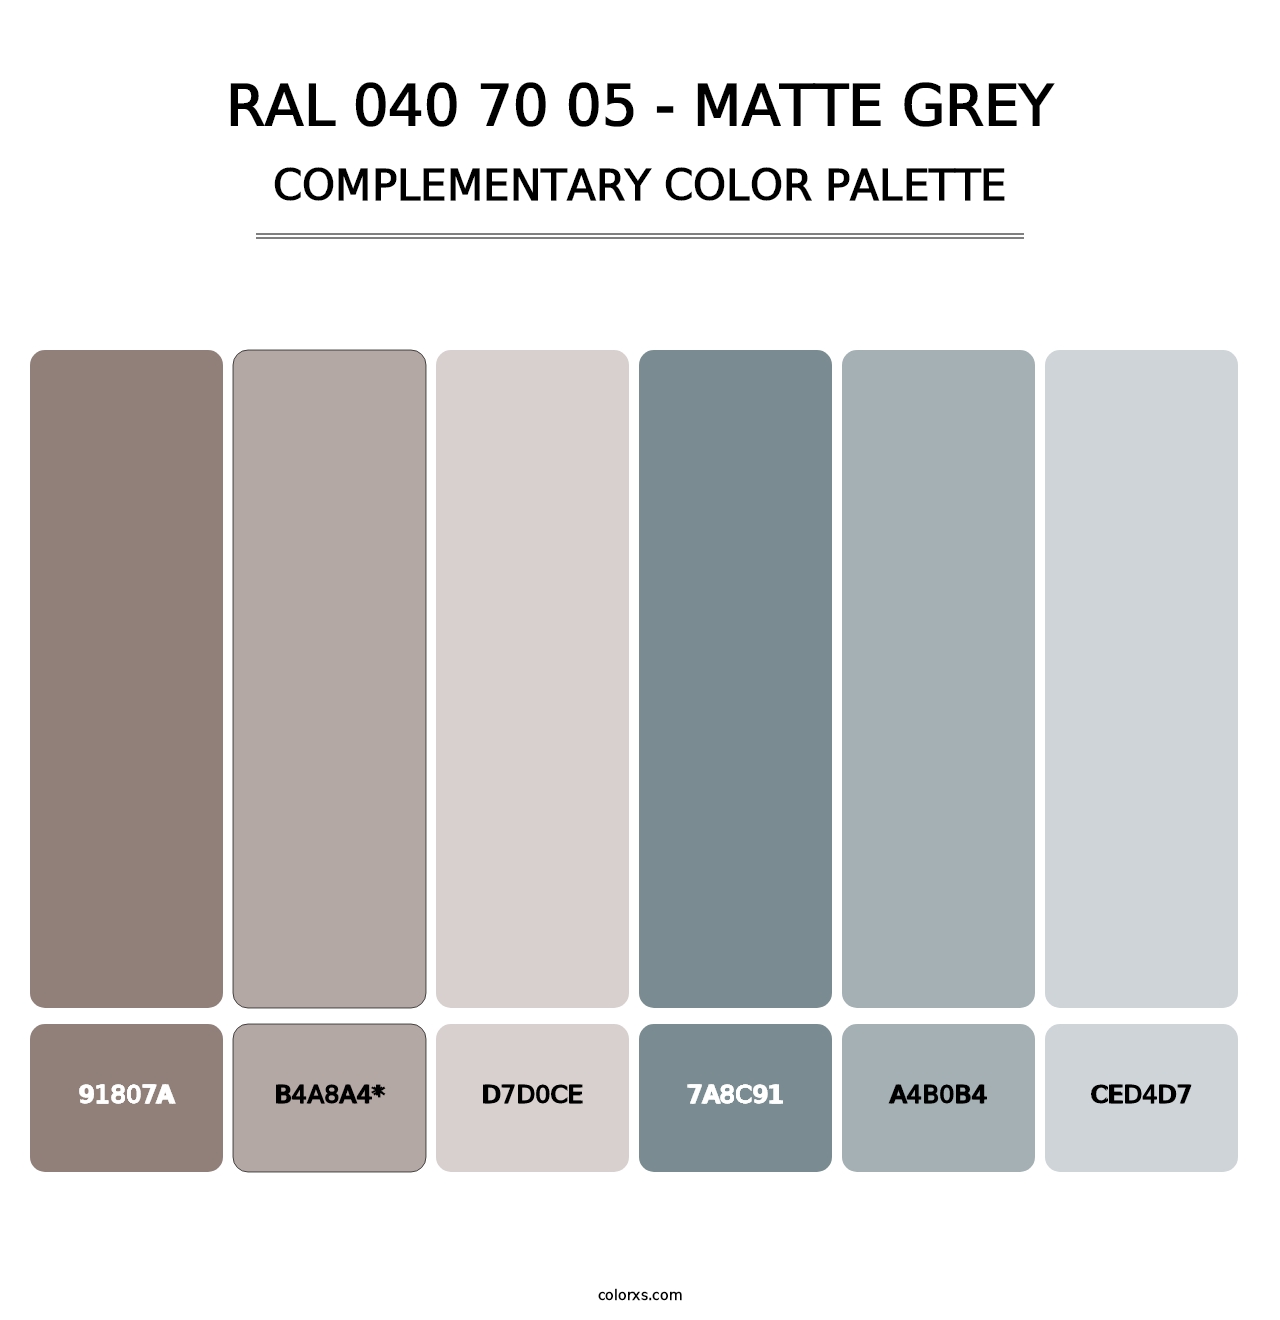 RAL 040 70 05 - Matte Grey - Complementary Color Palette